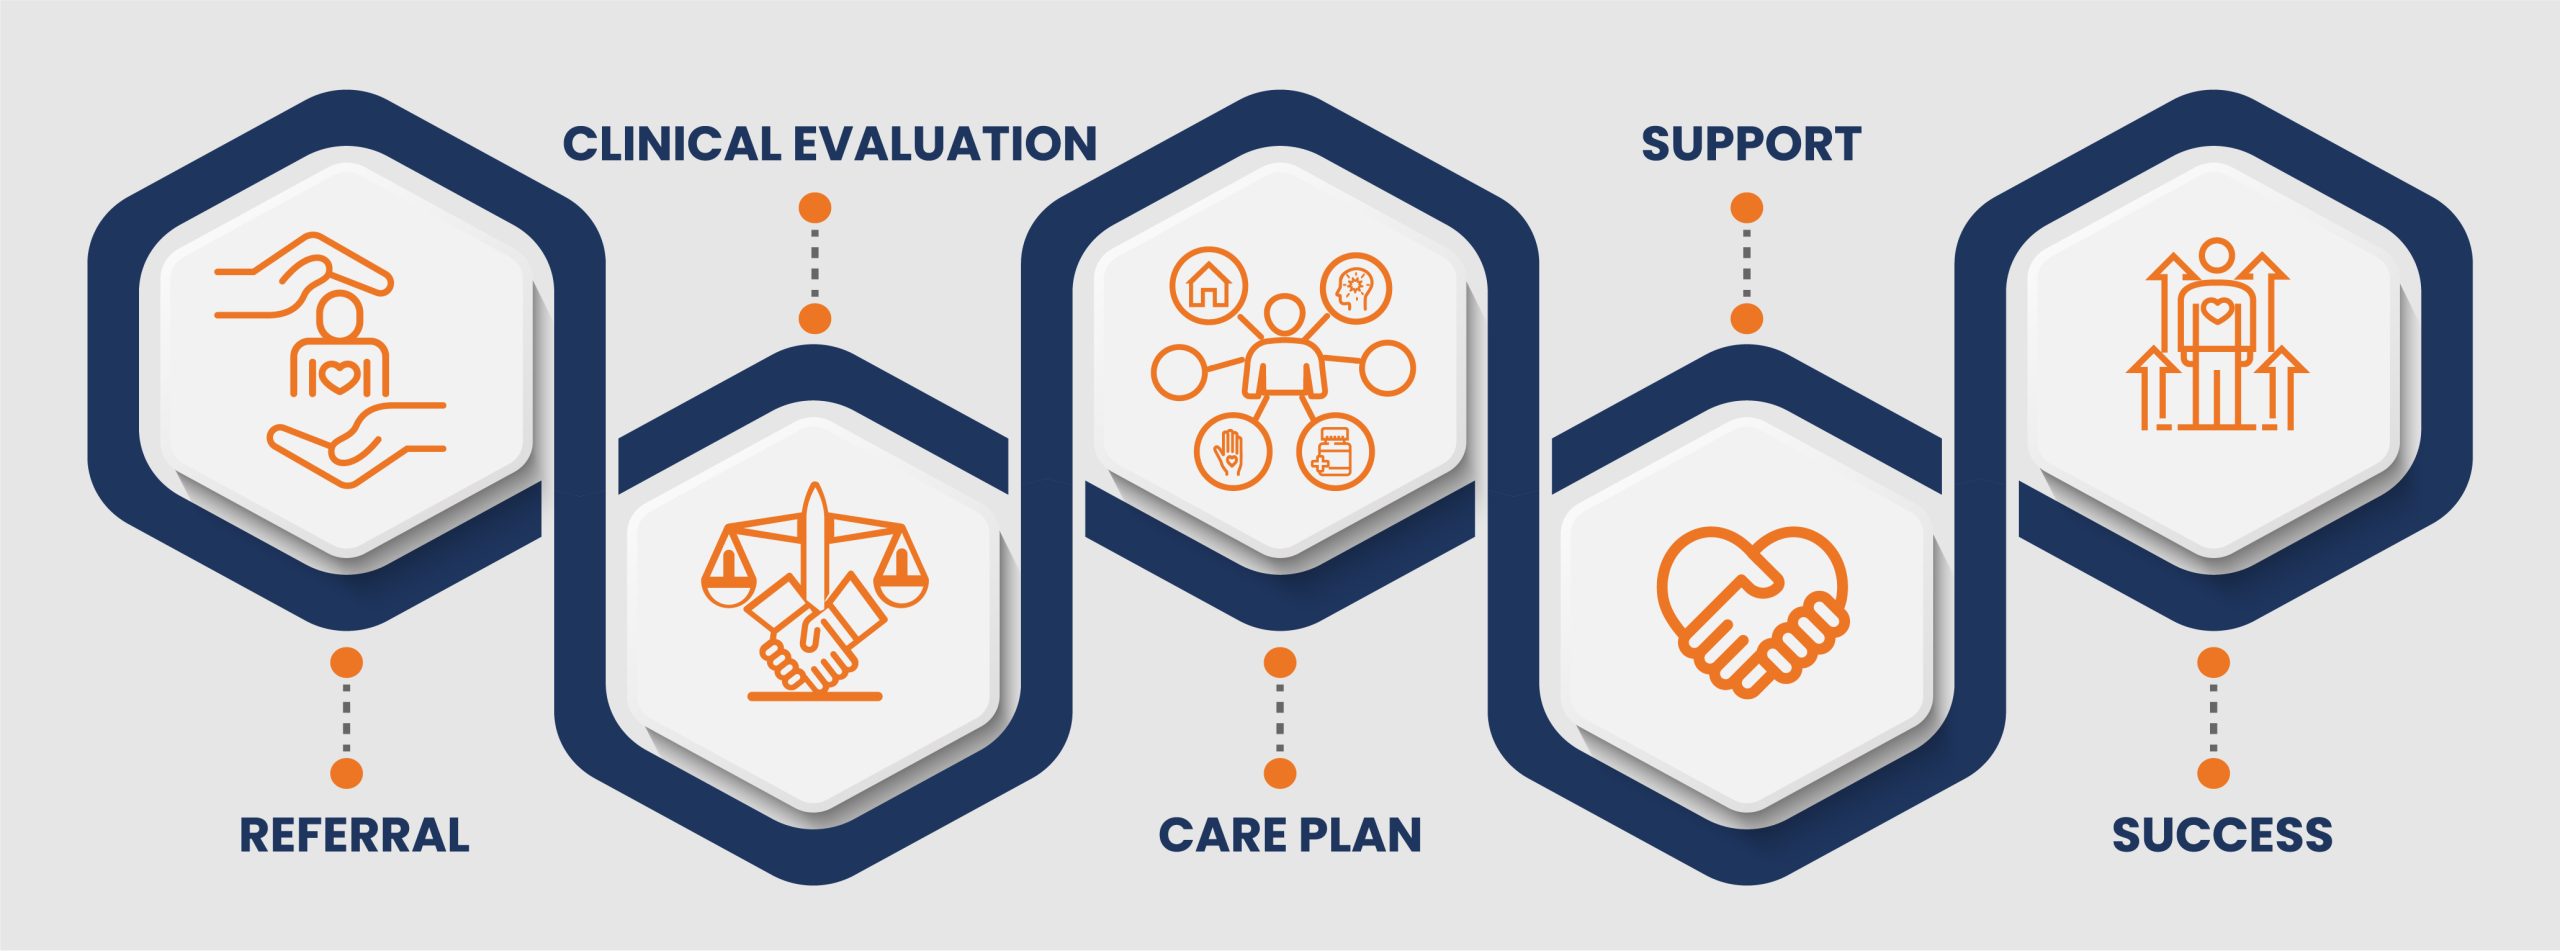 Steps through the CARE Court process: Referral, Clinical evaluation, Care plan, Support and Success.